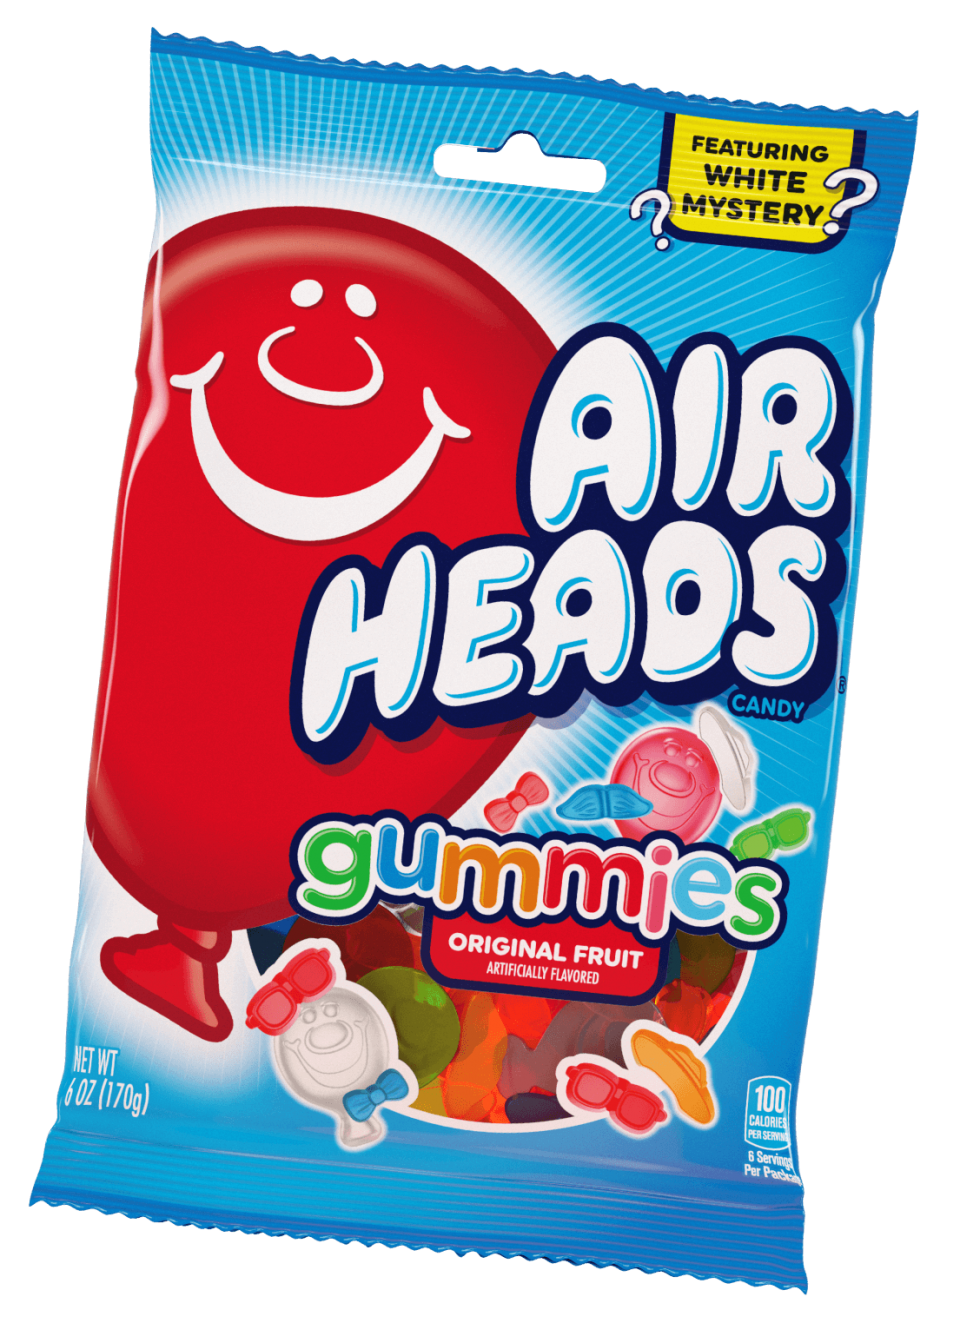 One package of Airheads Gummies.